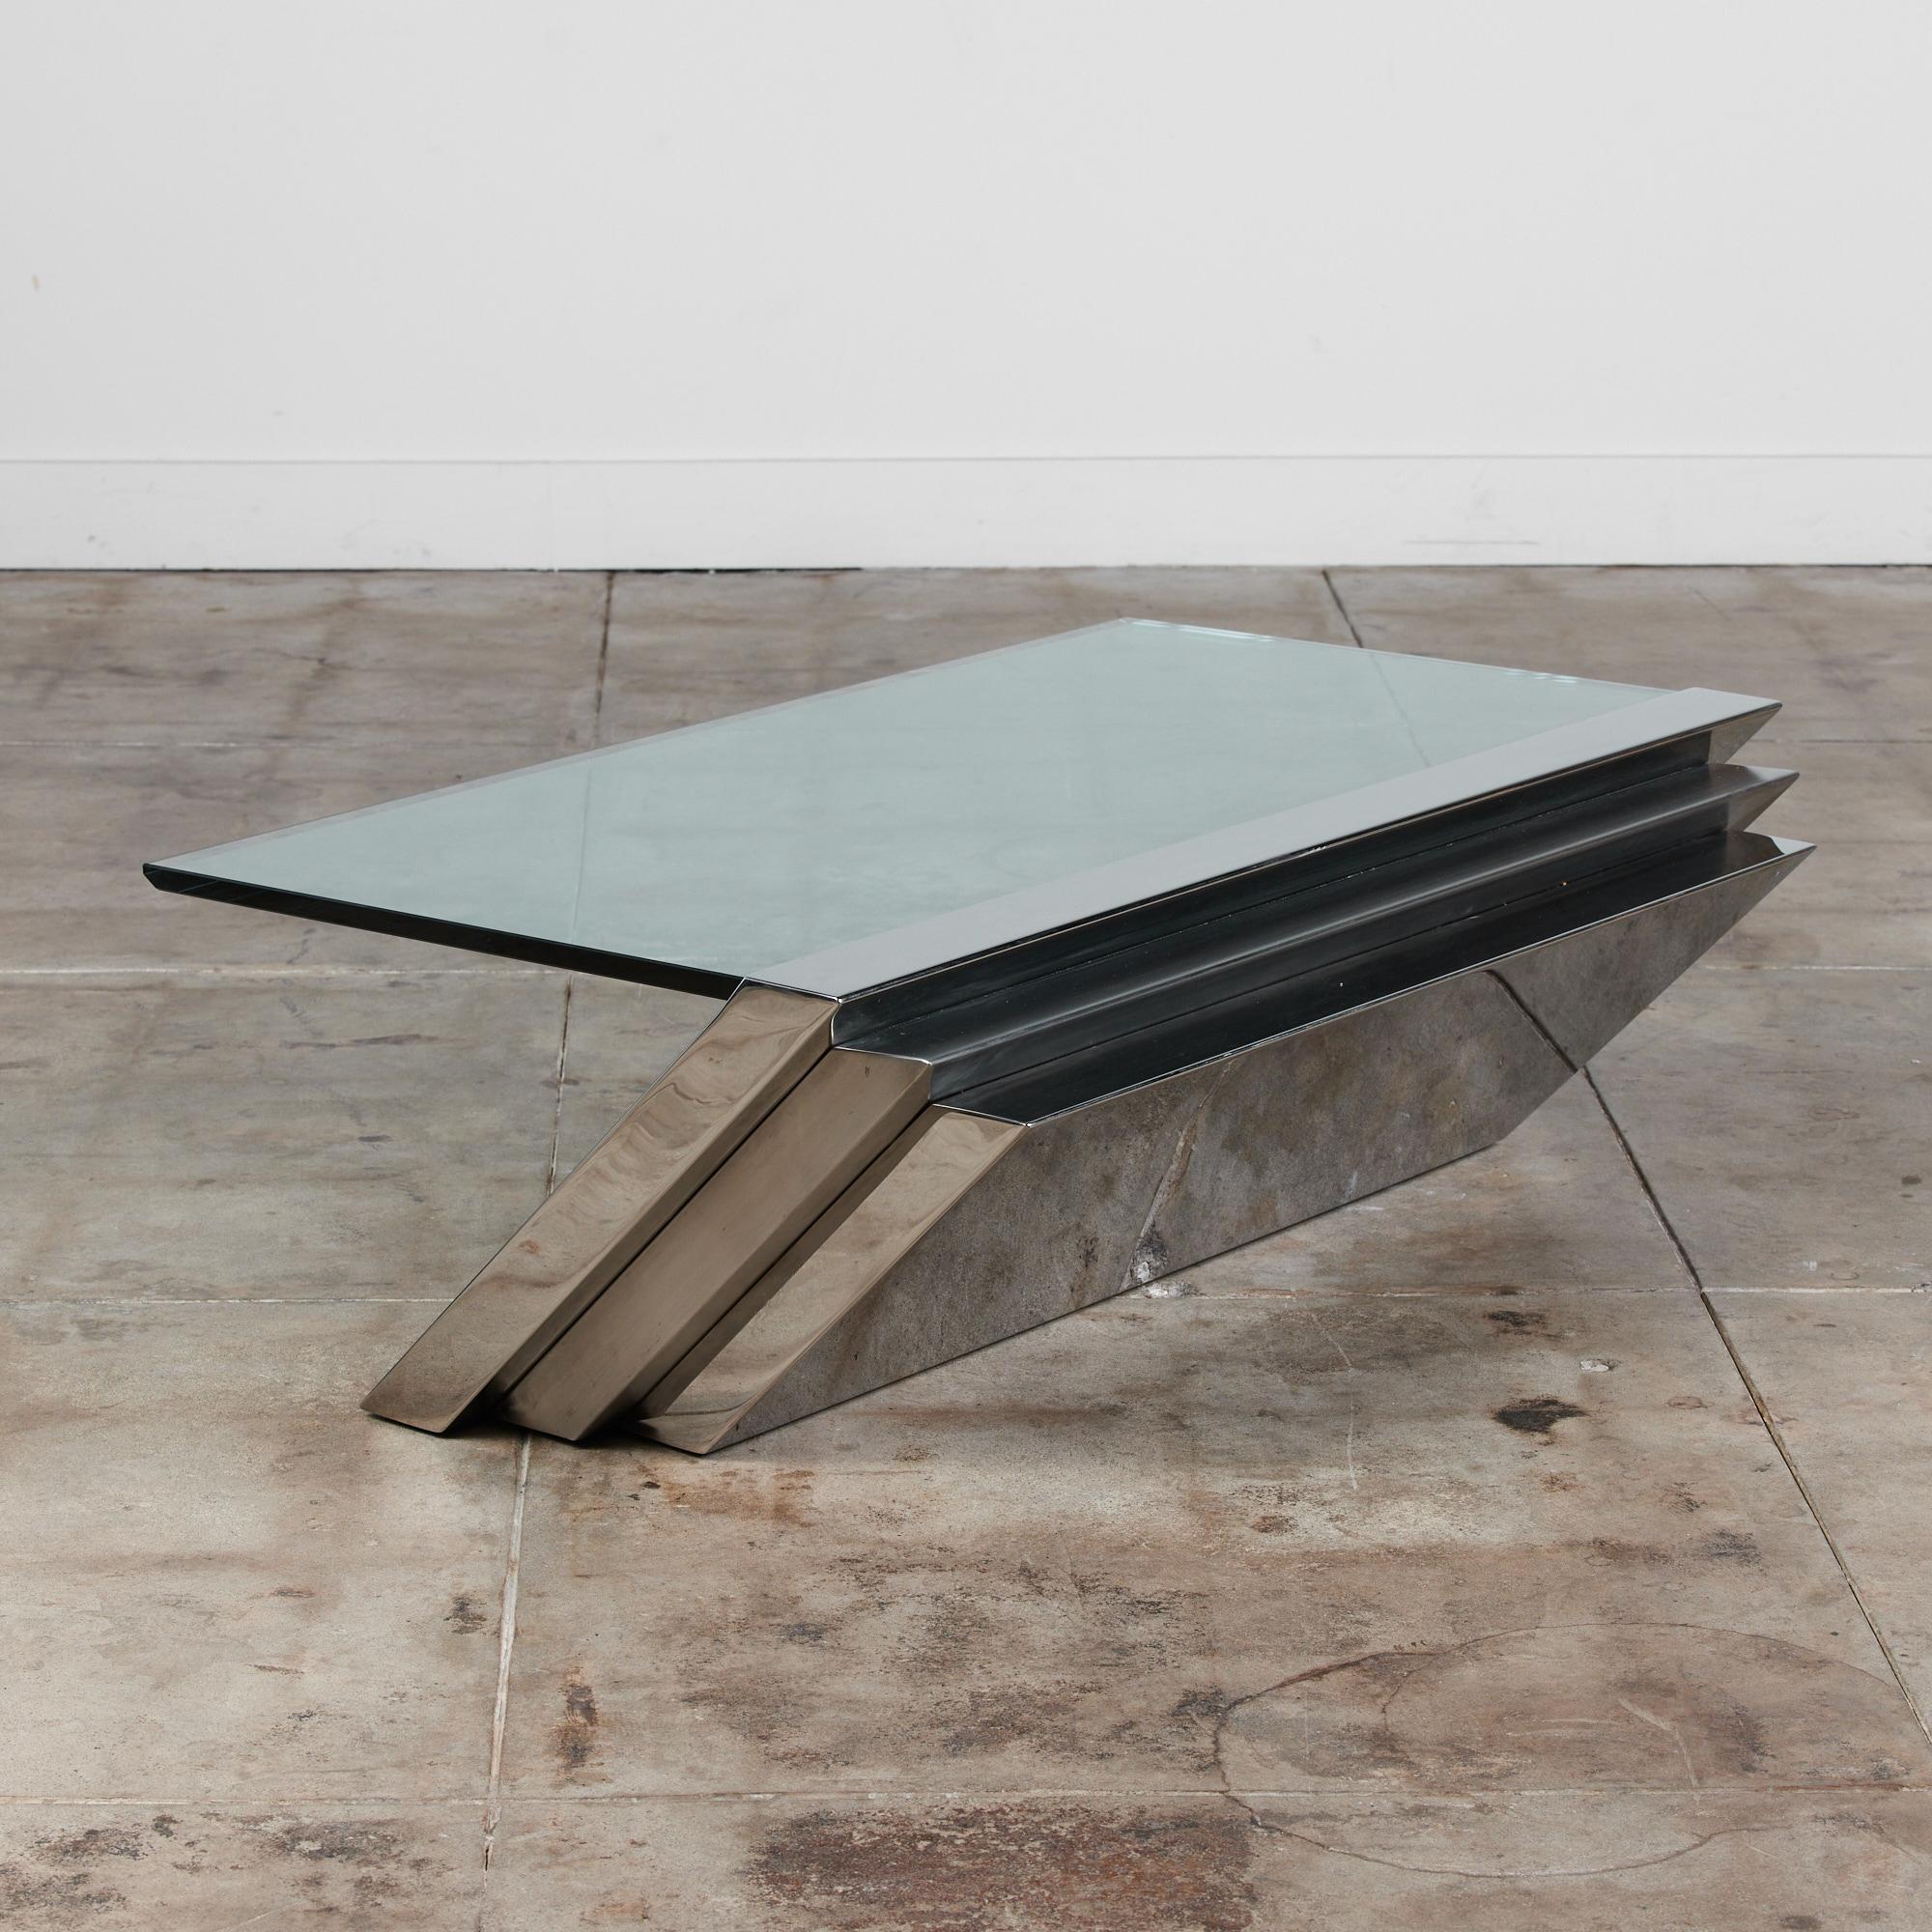 An angled long coffee table designed by J. Wade Beam for Brueton of New York. The company pioneered the use of stainless steel in home furnishings, and this example is typical of Beam's sharp, gravity-defying designs. A steeply angled stack of